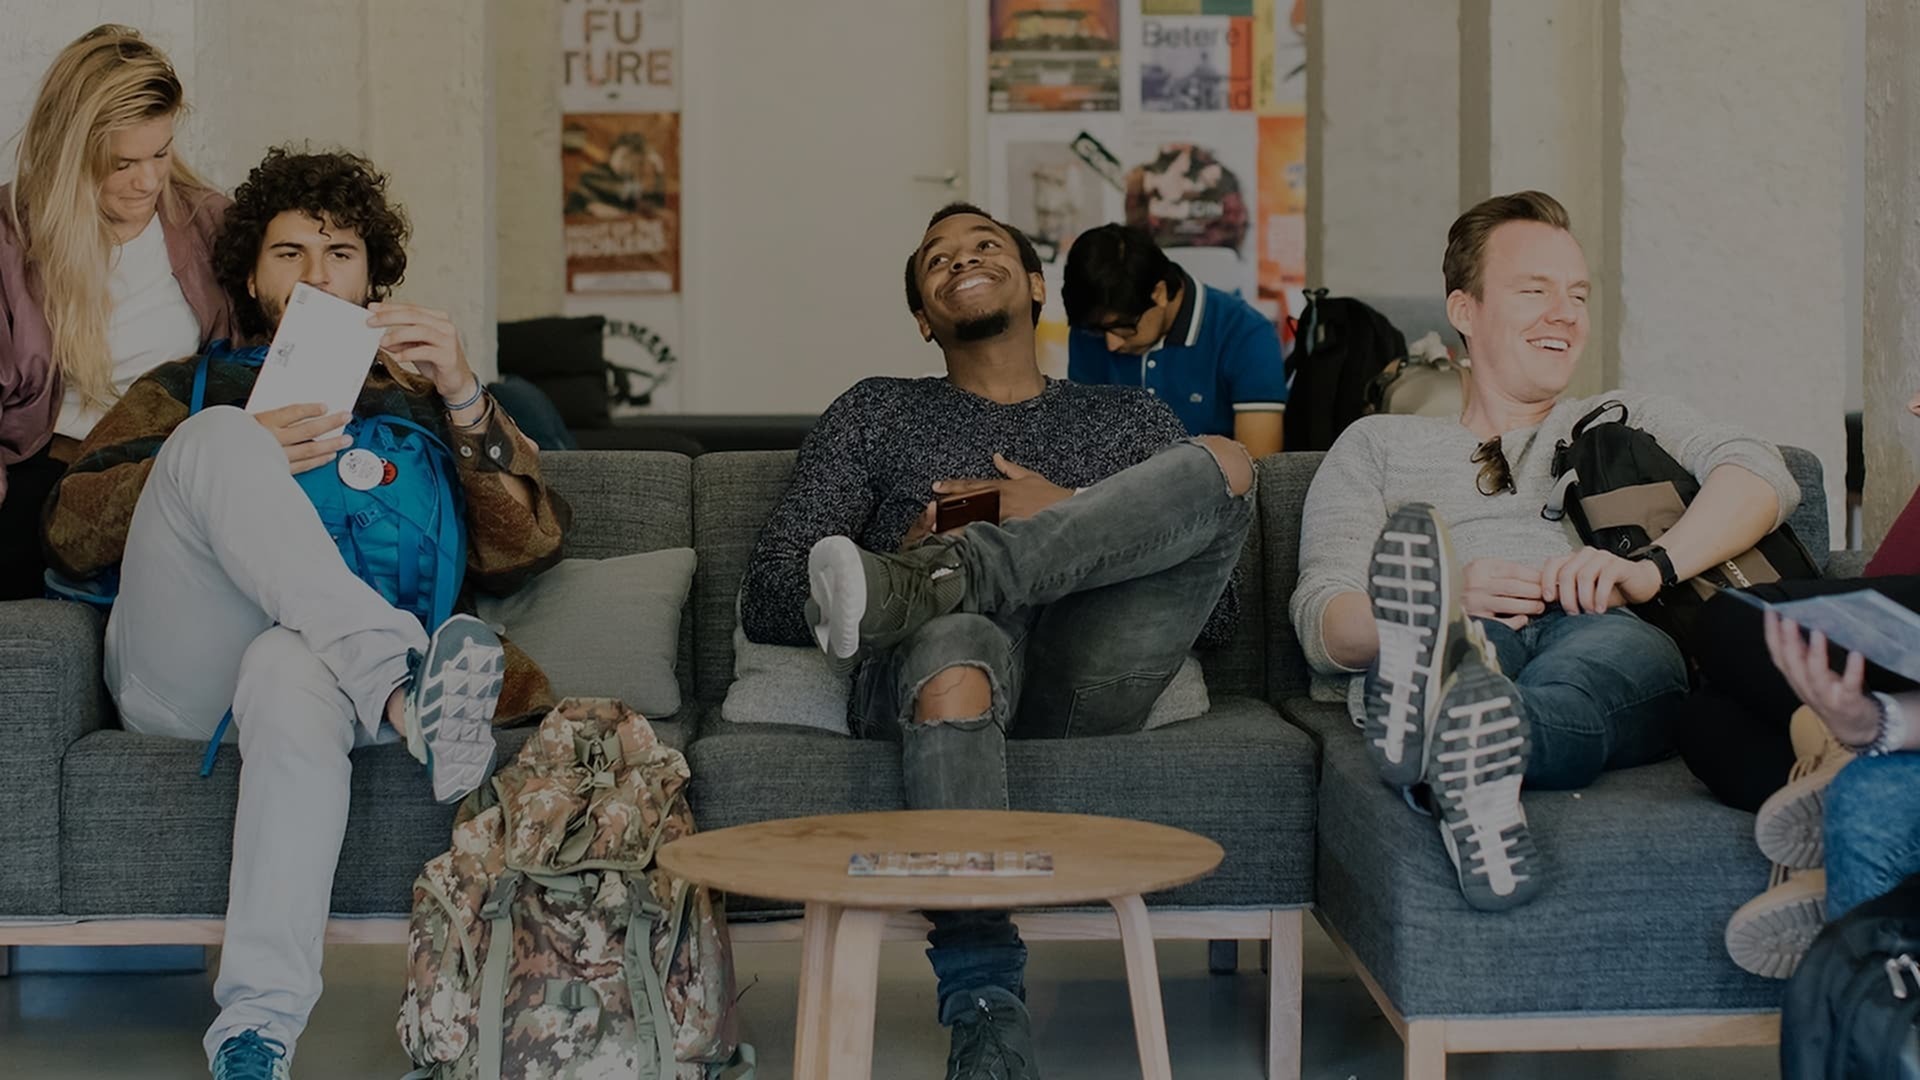 students hanging out on a couch